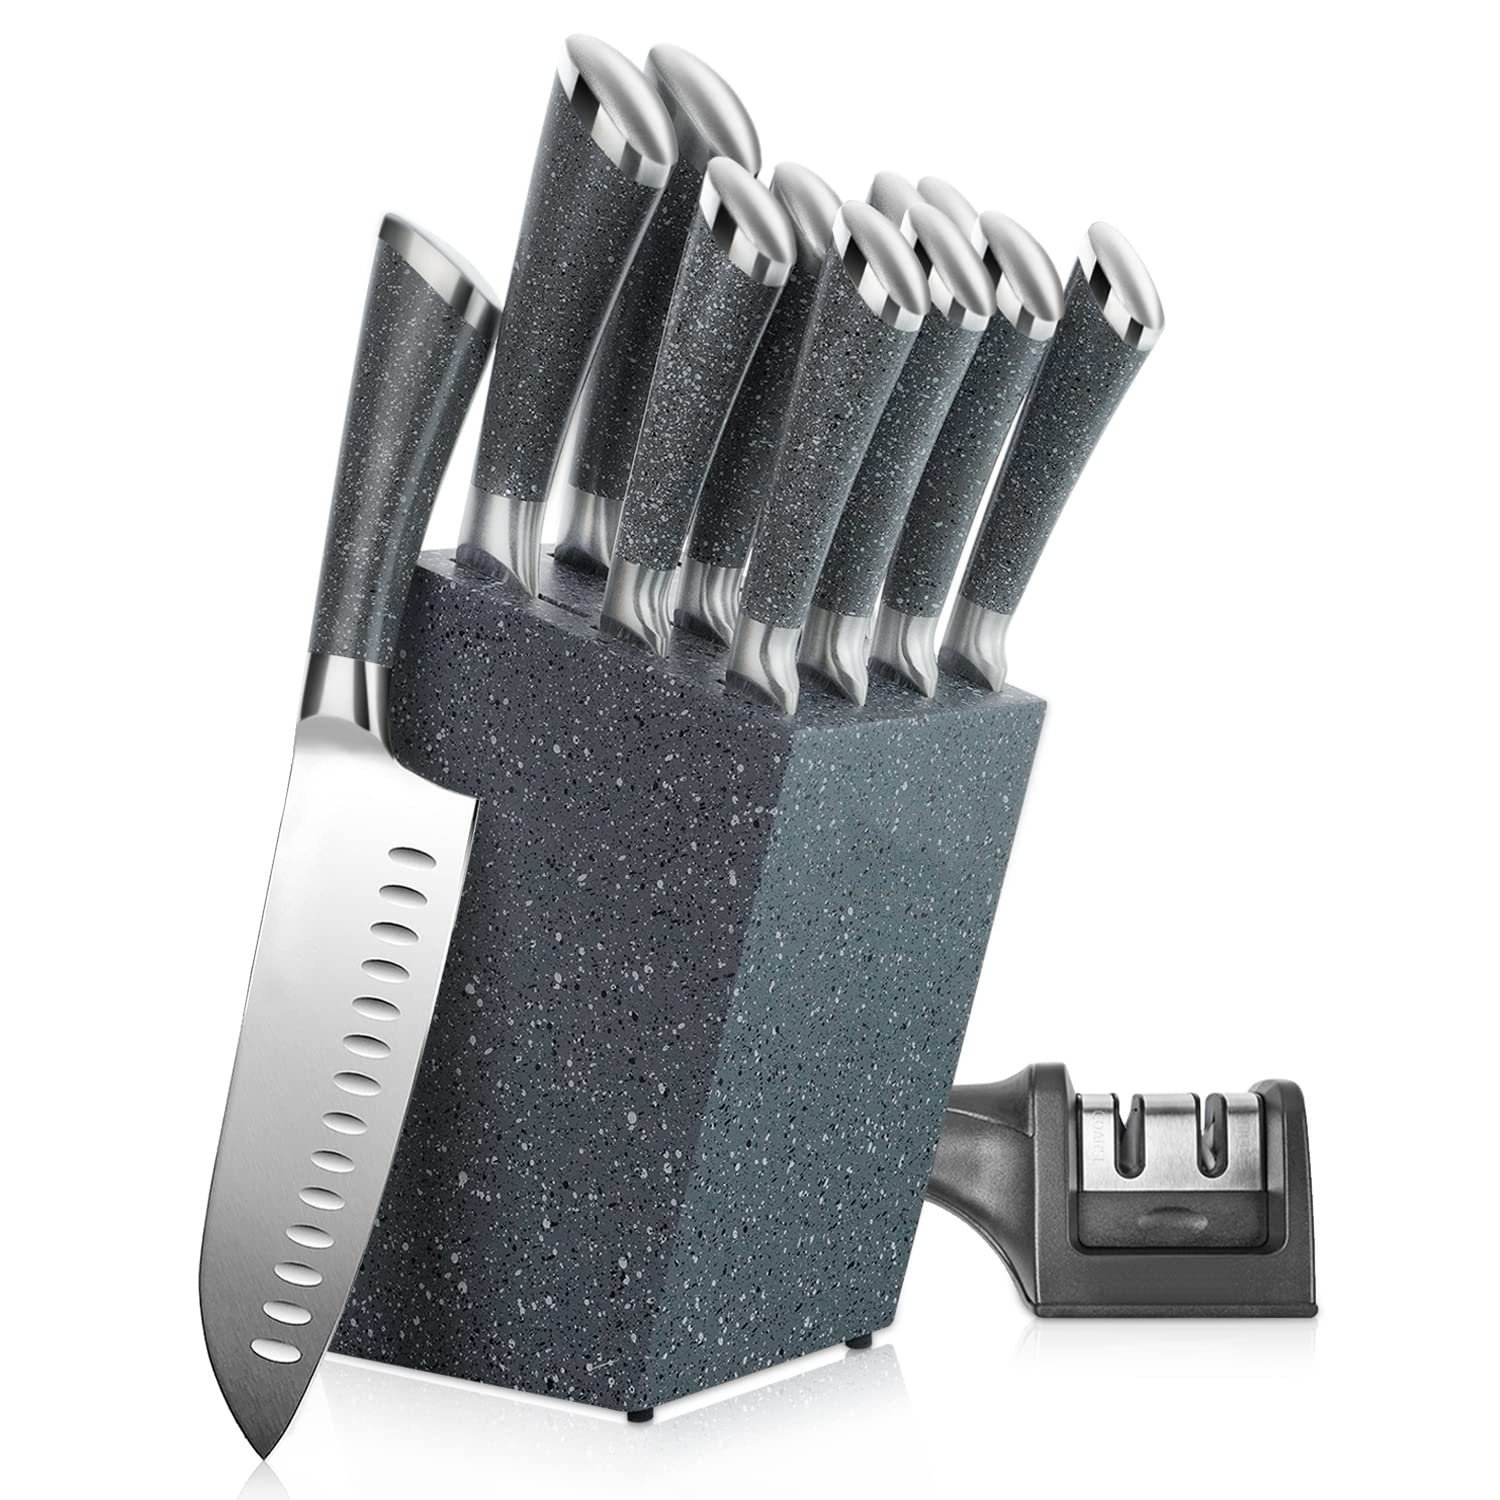 Cuisinart C77WTR-15PG Classic Forged Triple Rivet, 15-Piece Knife Set with  Block, Superior High-Carbon Stainless Steel Blades for Precision and